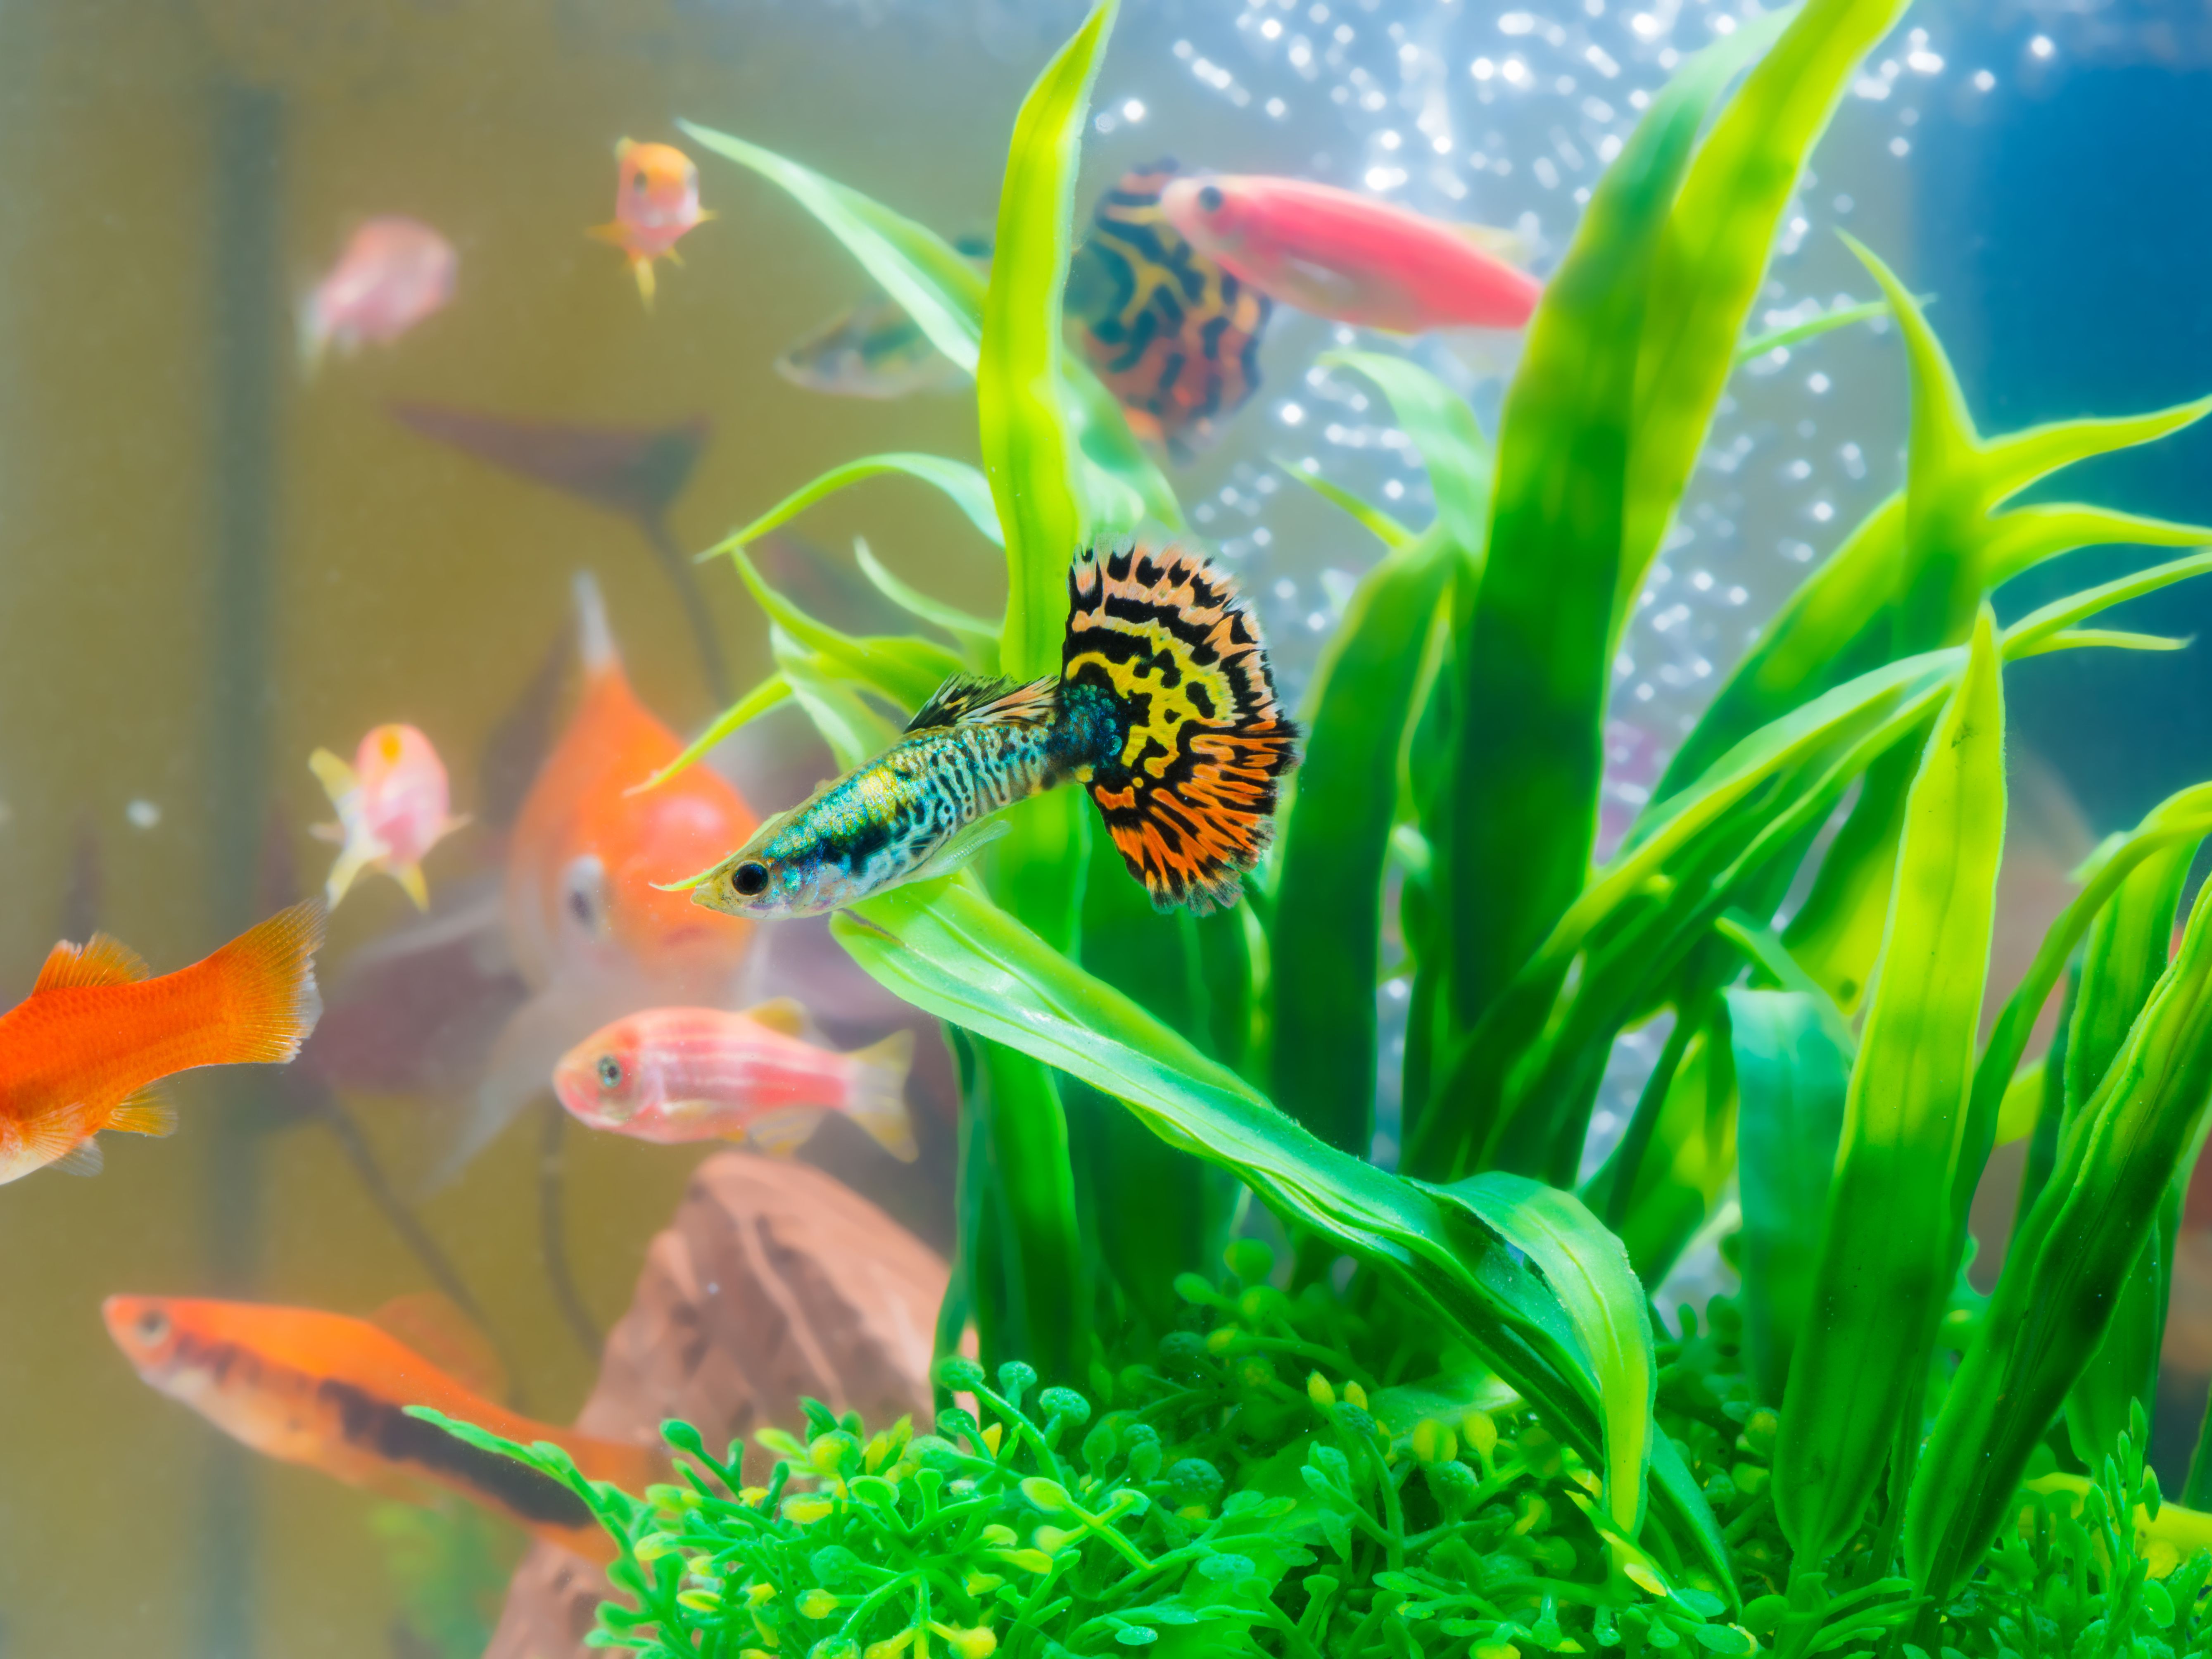 What is the smallest freshwater fish that can live in a tank?